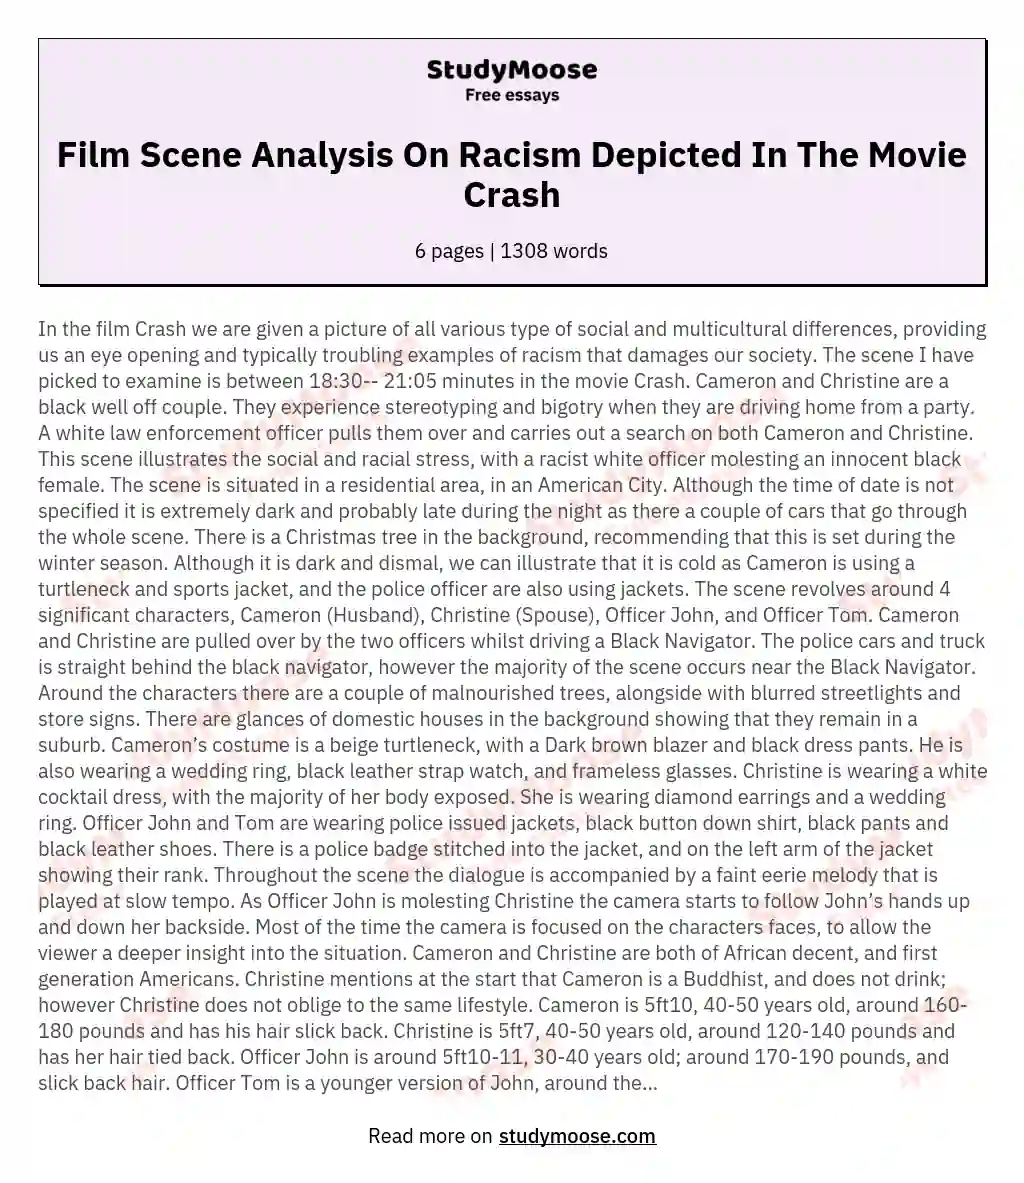 Film Scene Analysis On Racism Depicted In The Movie Crash essay